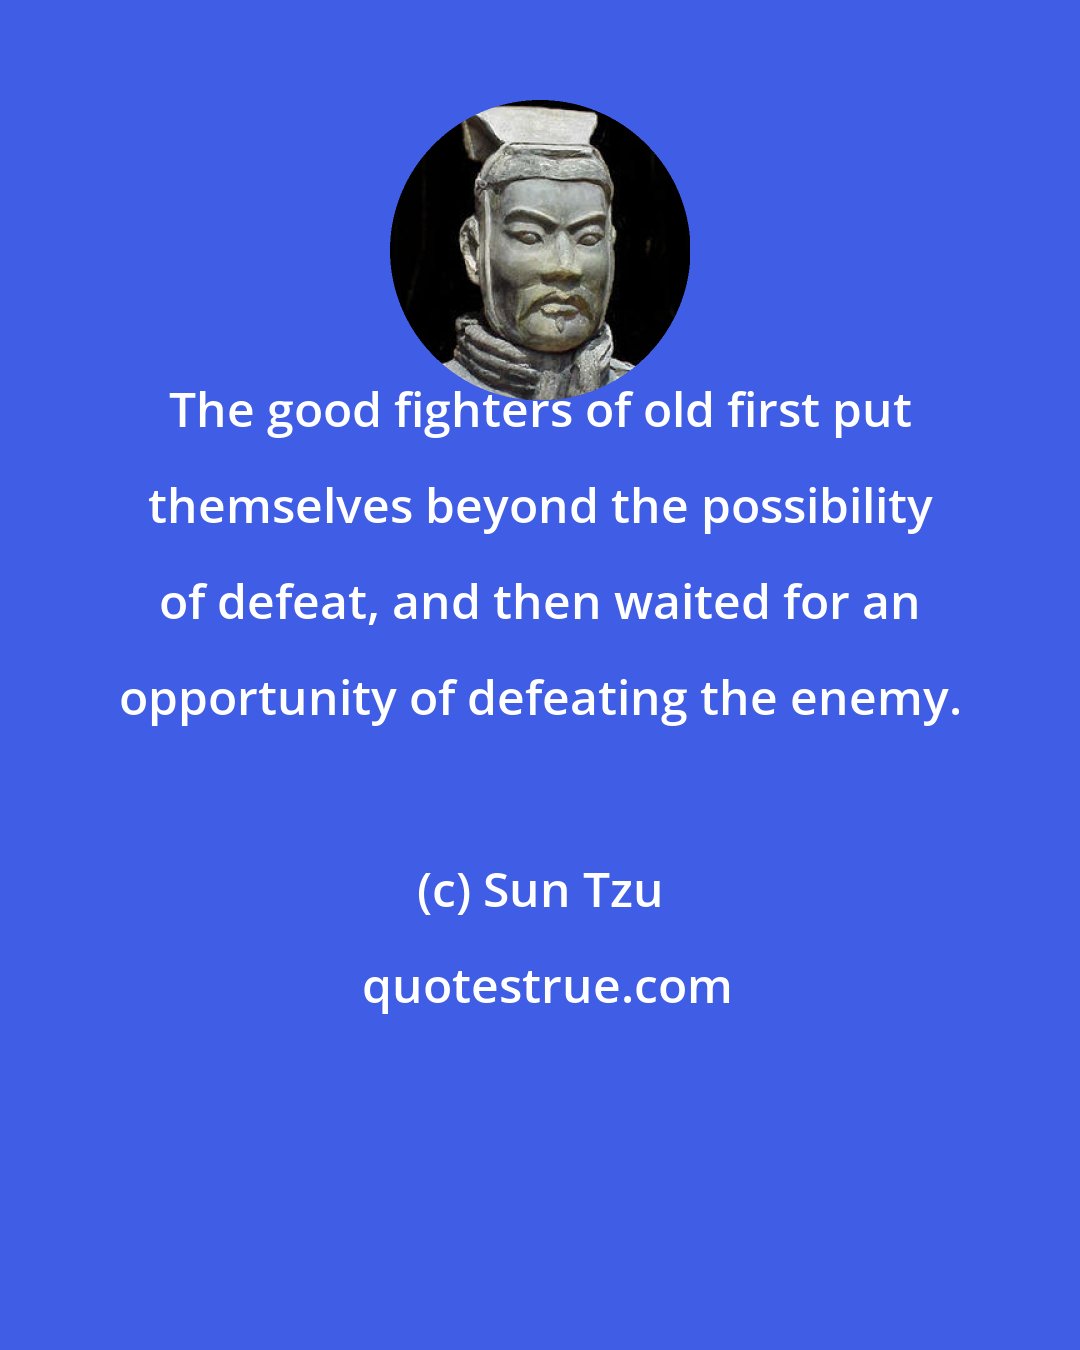 Sun Tzu: The good fighters of old first put themselves beyond the possibility of defeat, and then waited for an opportunity of defeating the enemy.